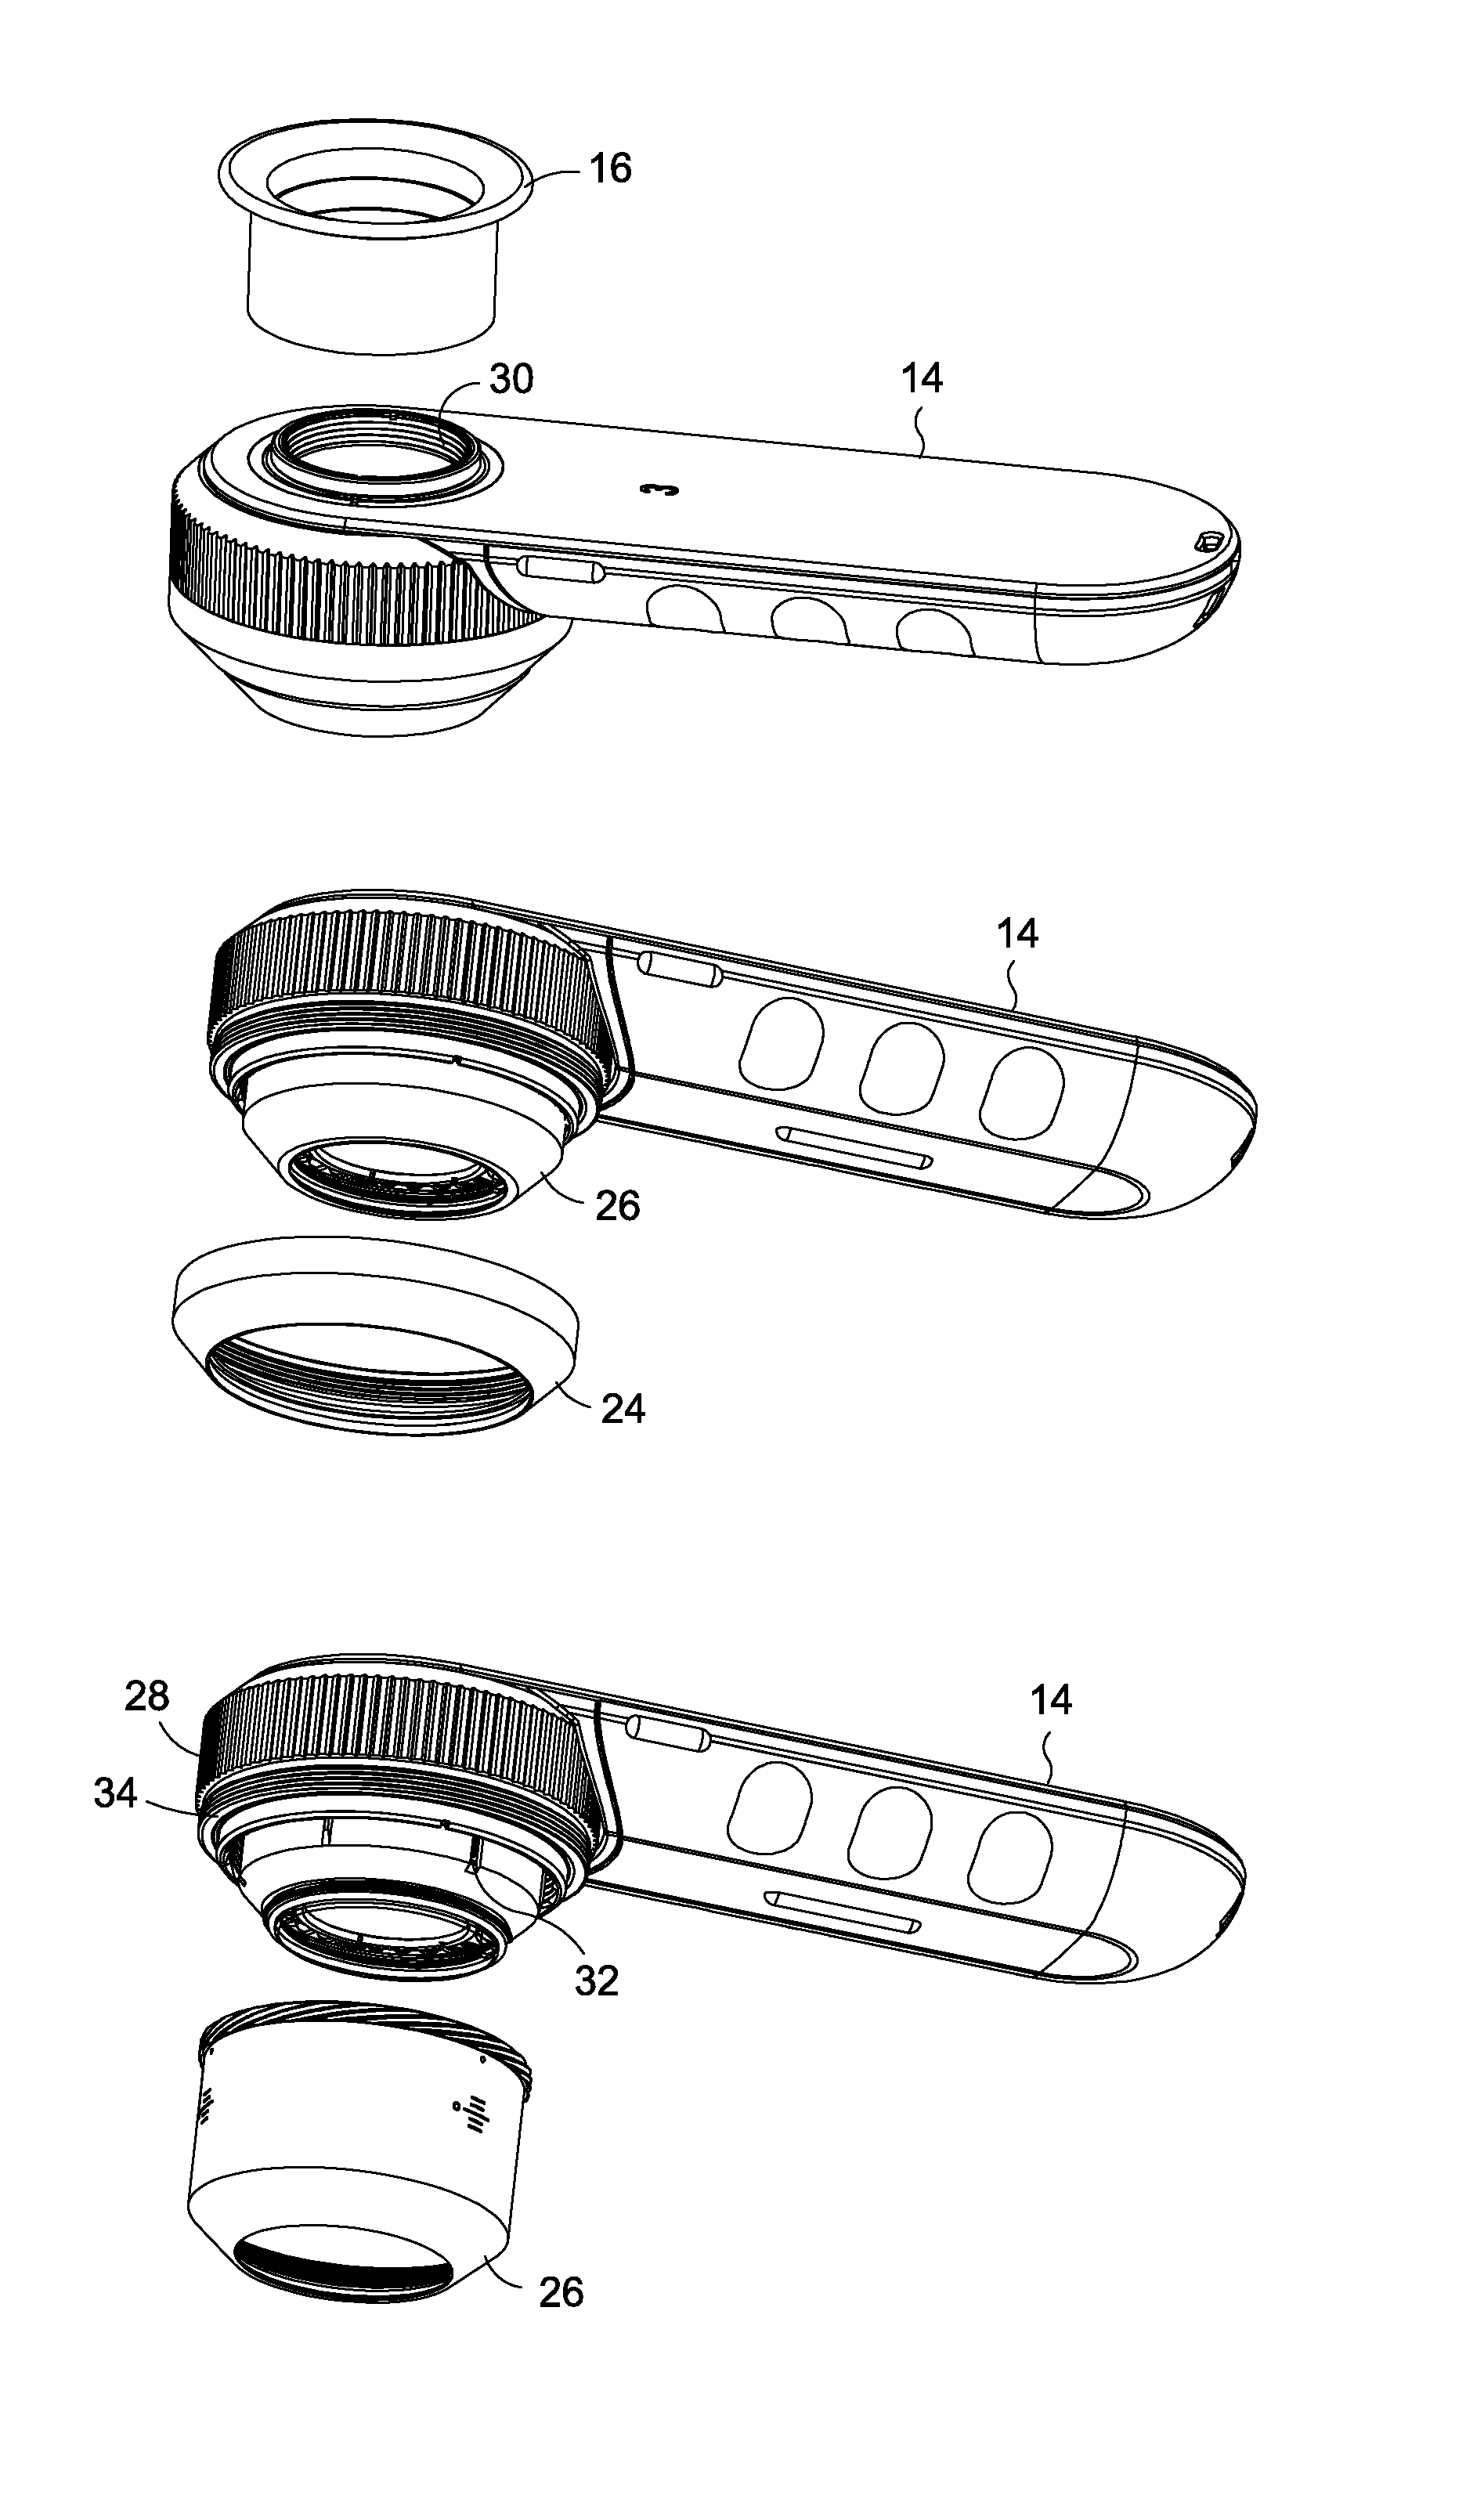 Dermoscopy illumination device with selective polarization and orange light for enhanced viewing of pigmented tissue